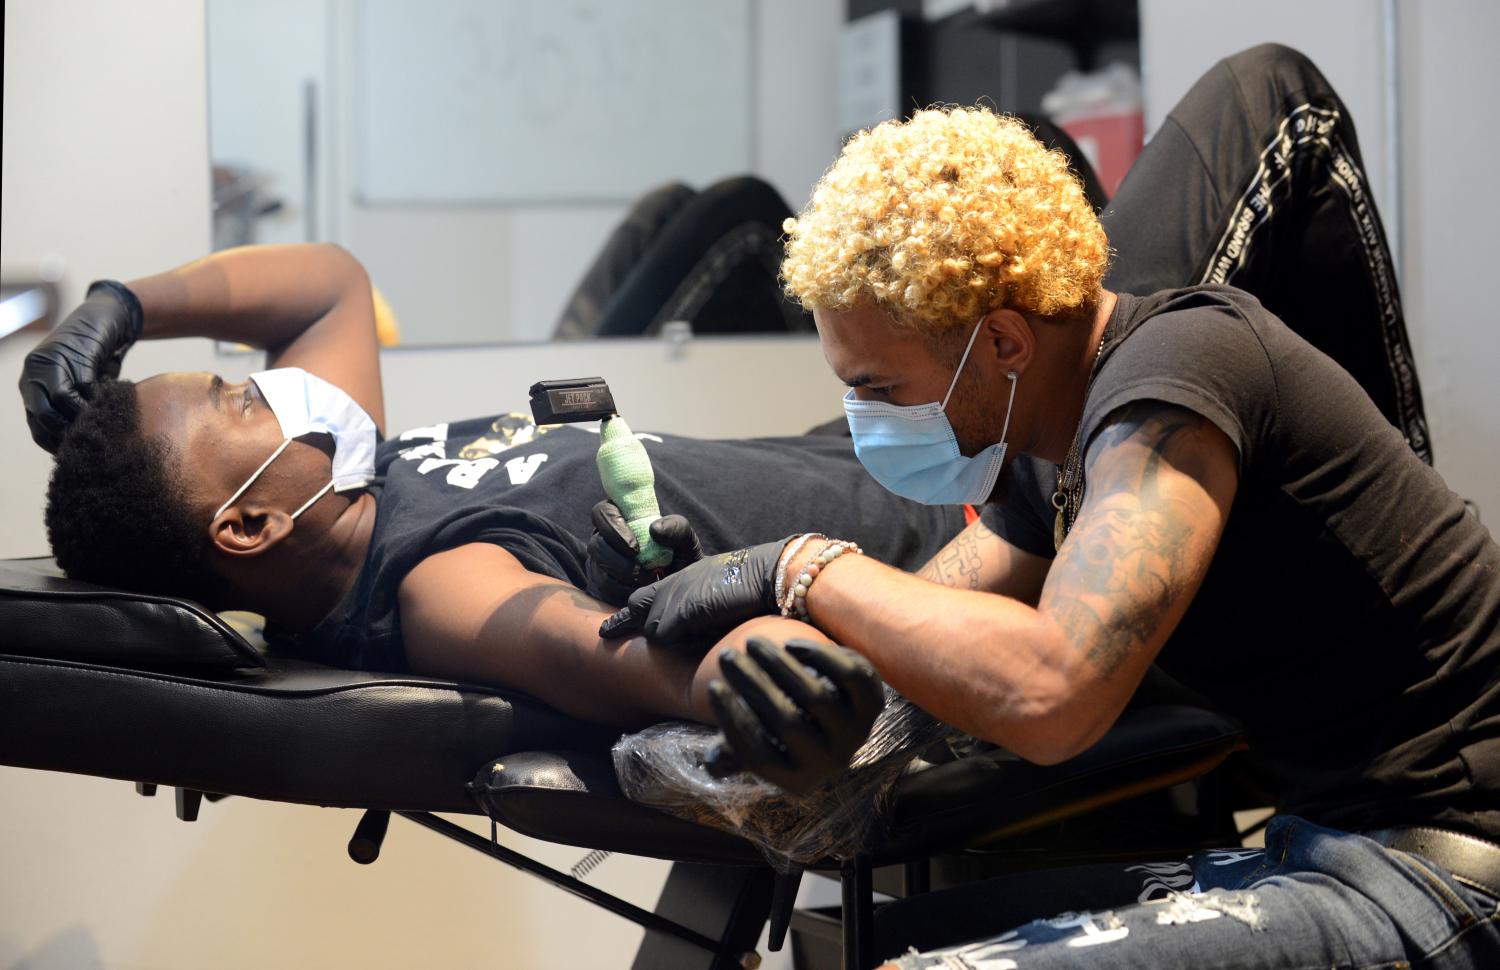 Jay Williams tattoos a customer who gave his name as D OJ at Black Ink Atlanta, during the phased reopening of businesses and restaurants from coronavirus disease (COVID-19) restrictions in the state, in Atlanta, Georgia, U.S., April 24, 2020. REUTERS/Bita Honarvar